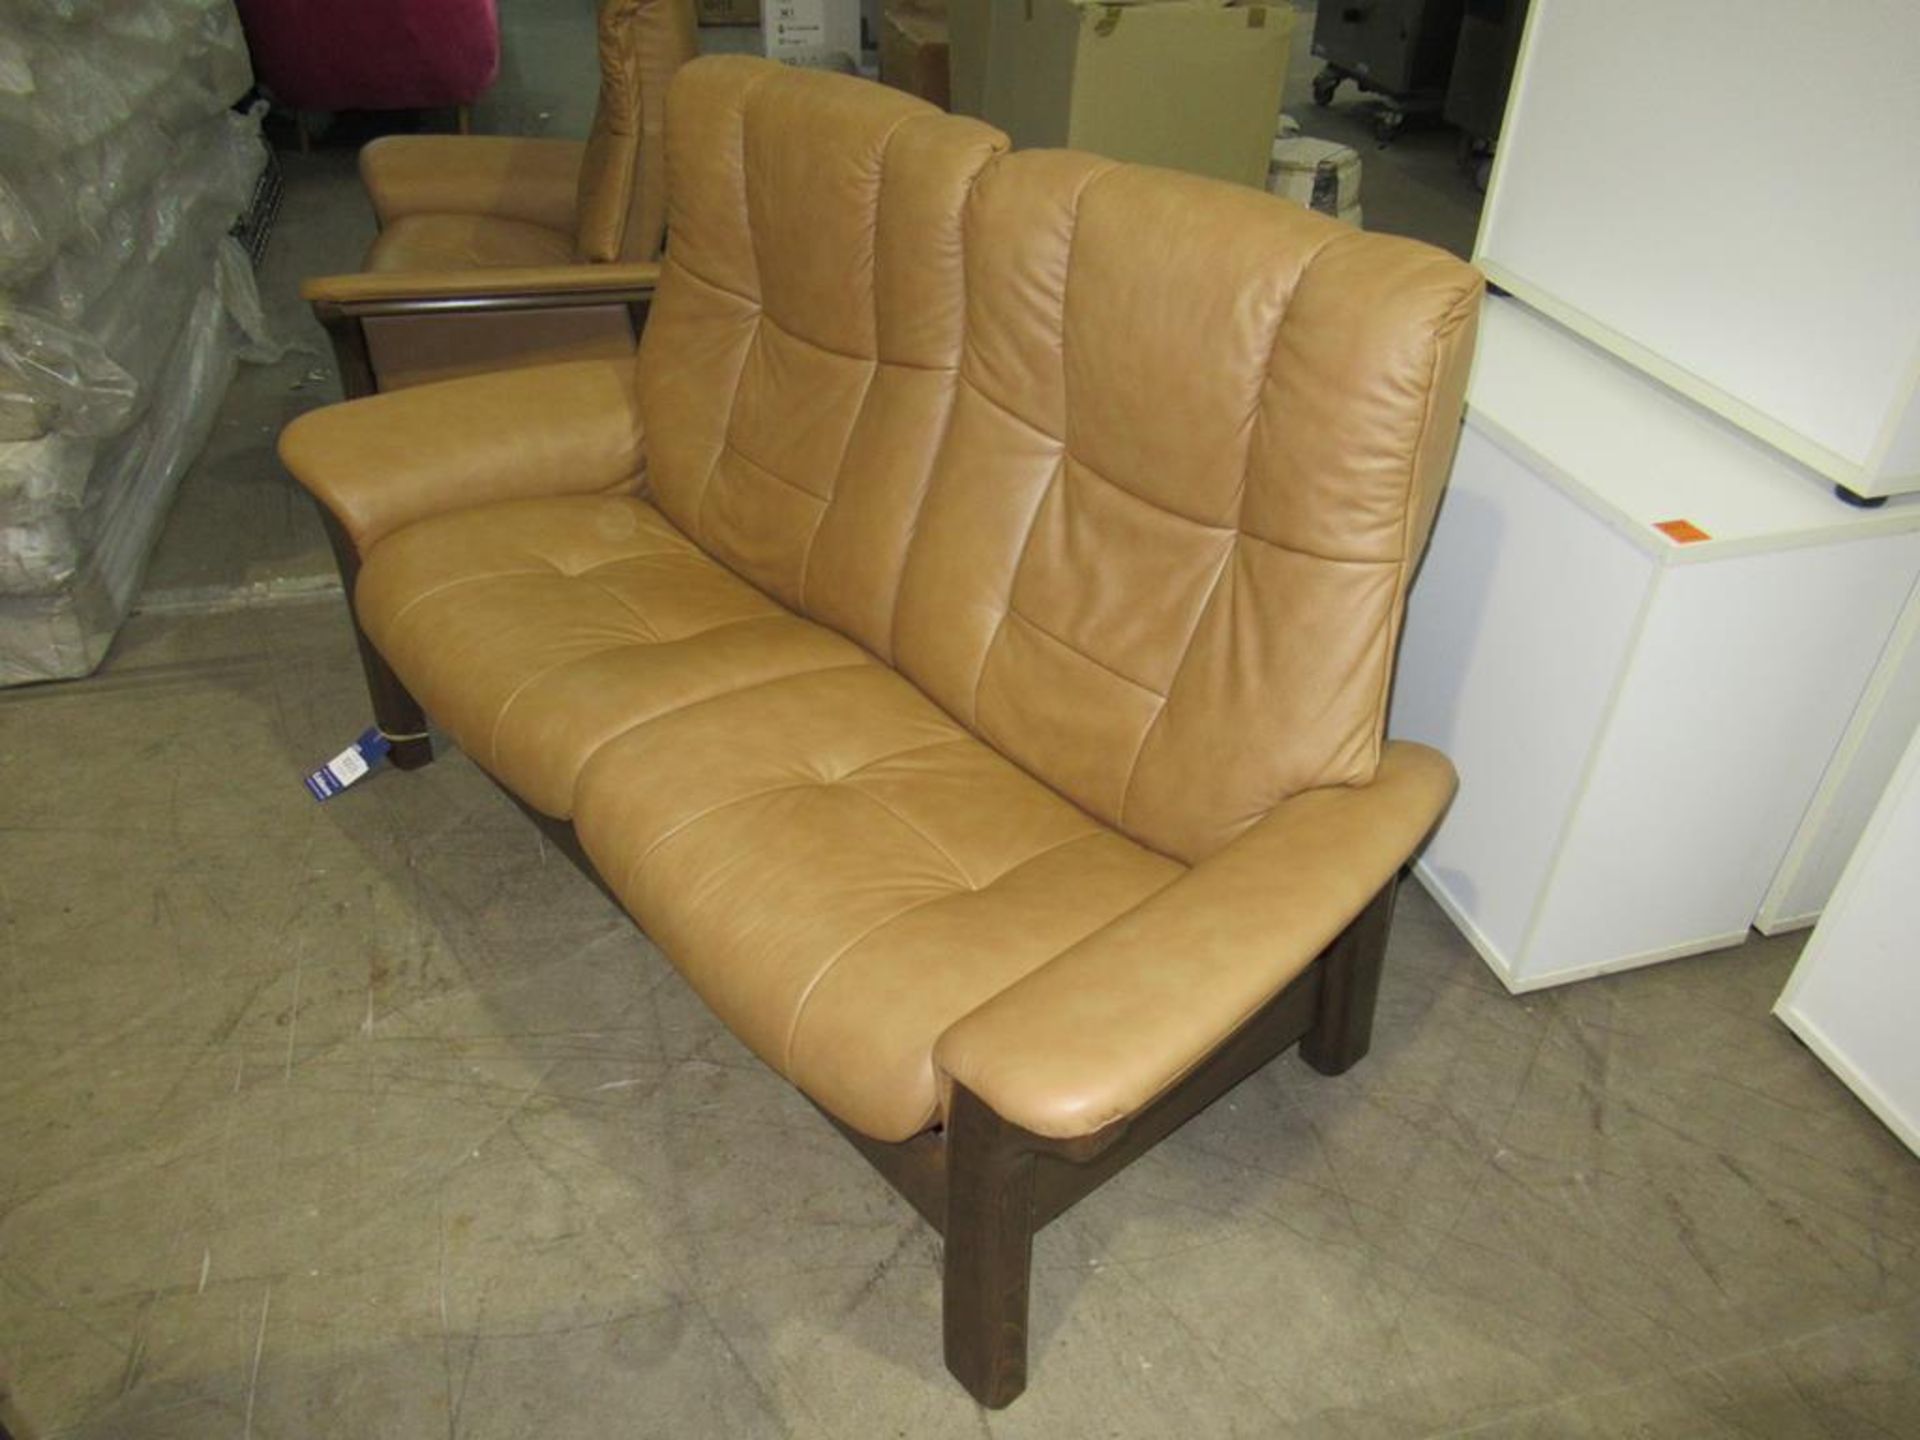 Stressless Scandinavian Tan Leather Reclining Two-Seater Sofa - Image 2 of 4